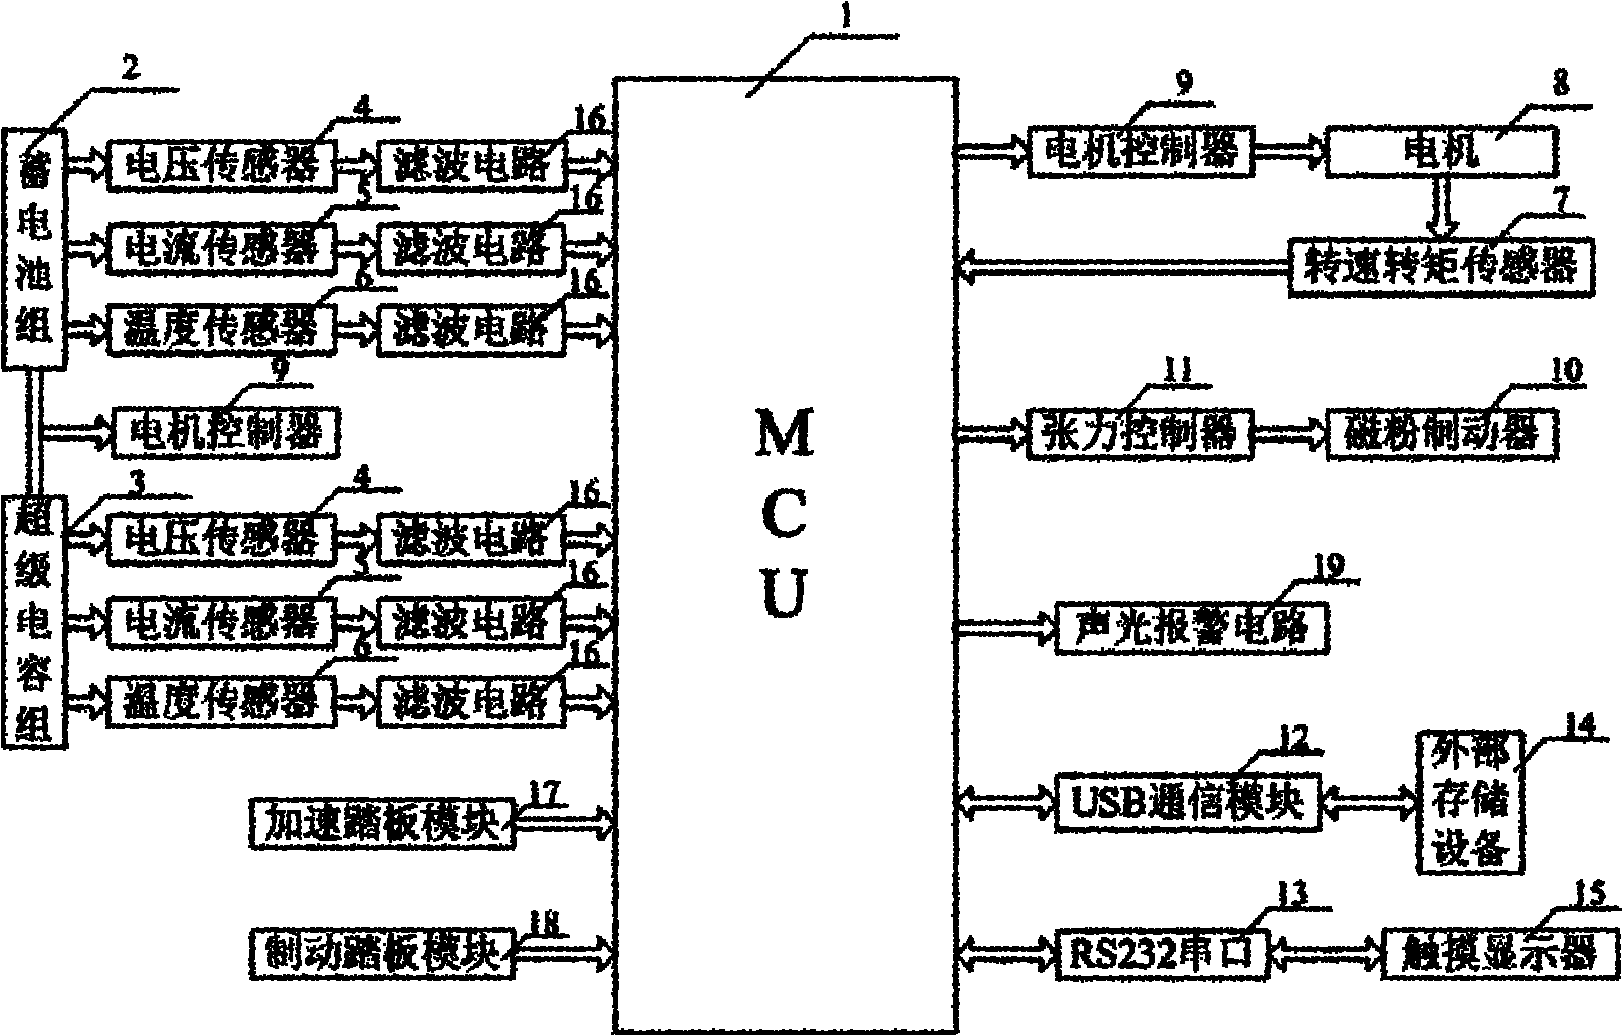 Monitoring system for electric vehicle regenerative braking and energy system comprehensive experimental device